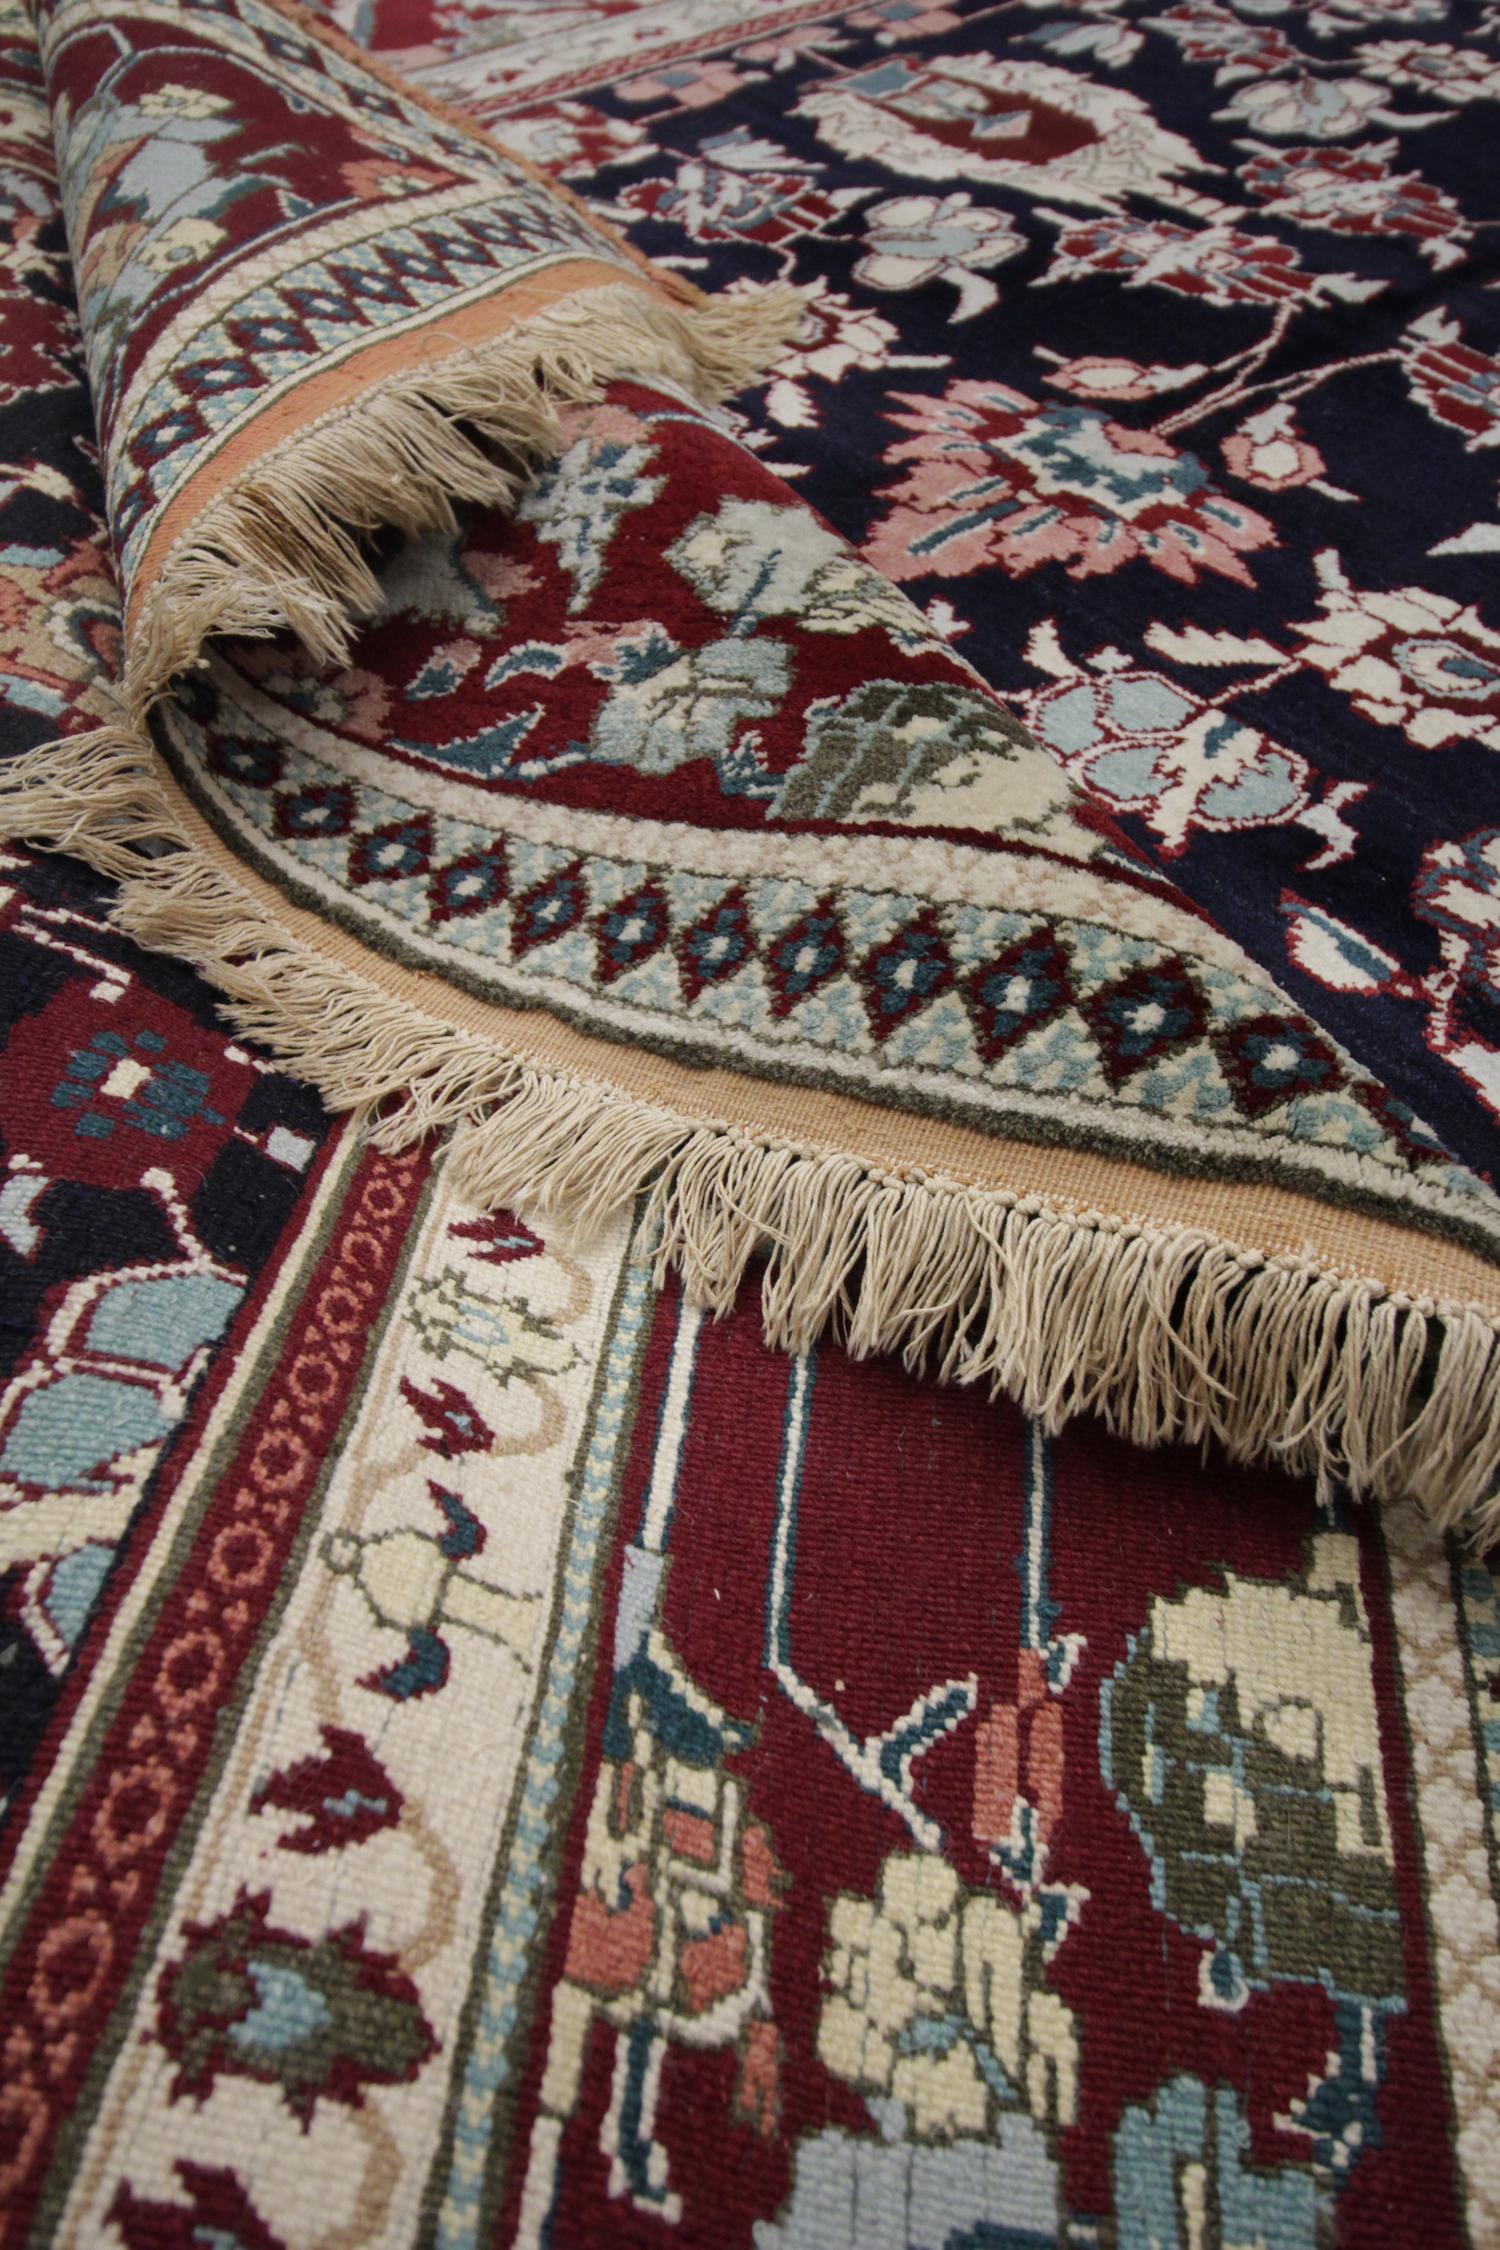 Tribal Handmade Carpet Antique Rugs Indian Traditional Red black Wool Rug For Sale